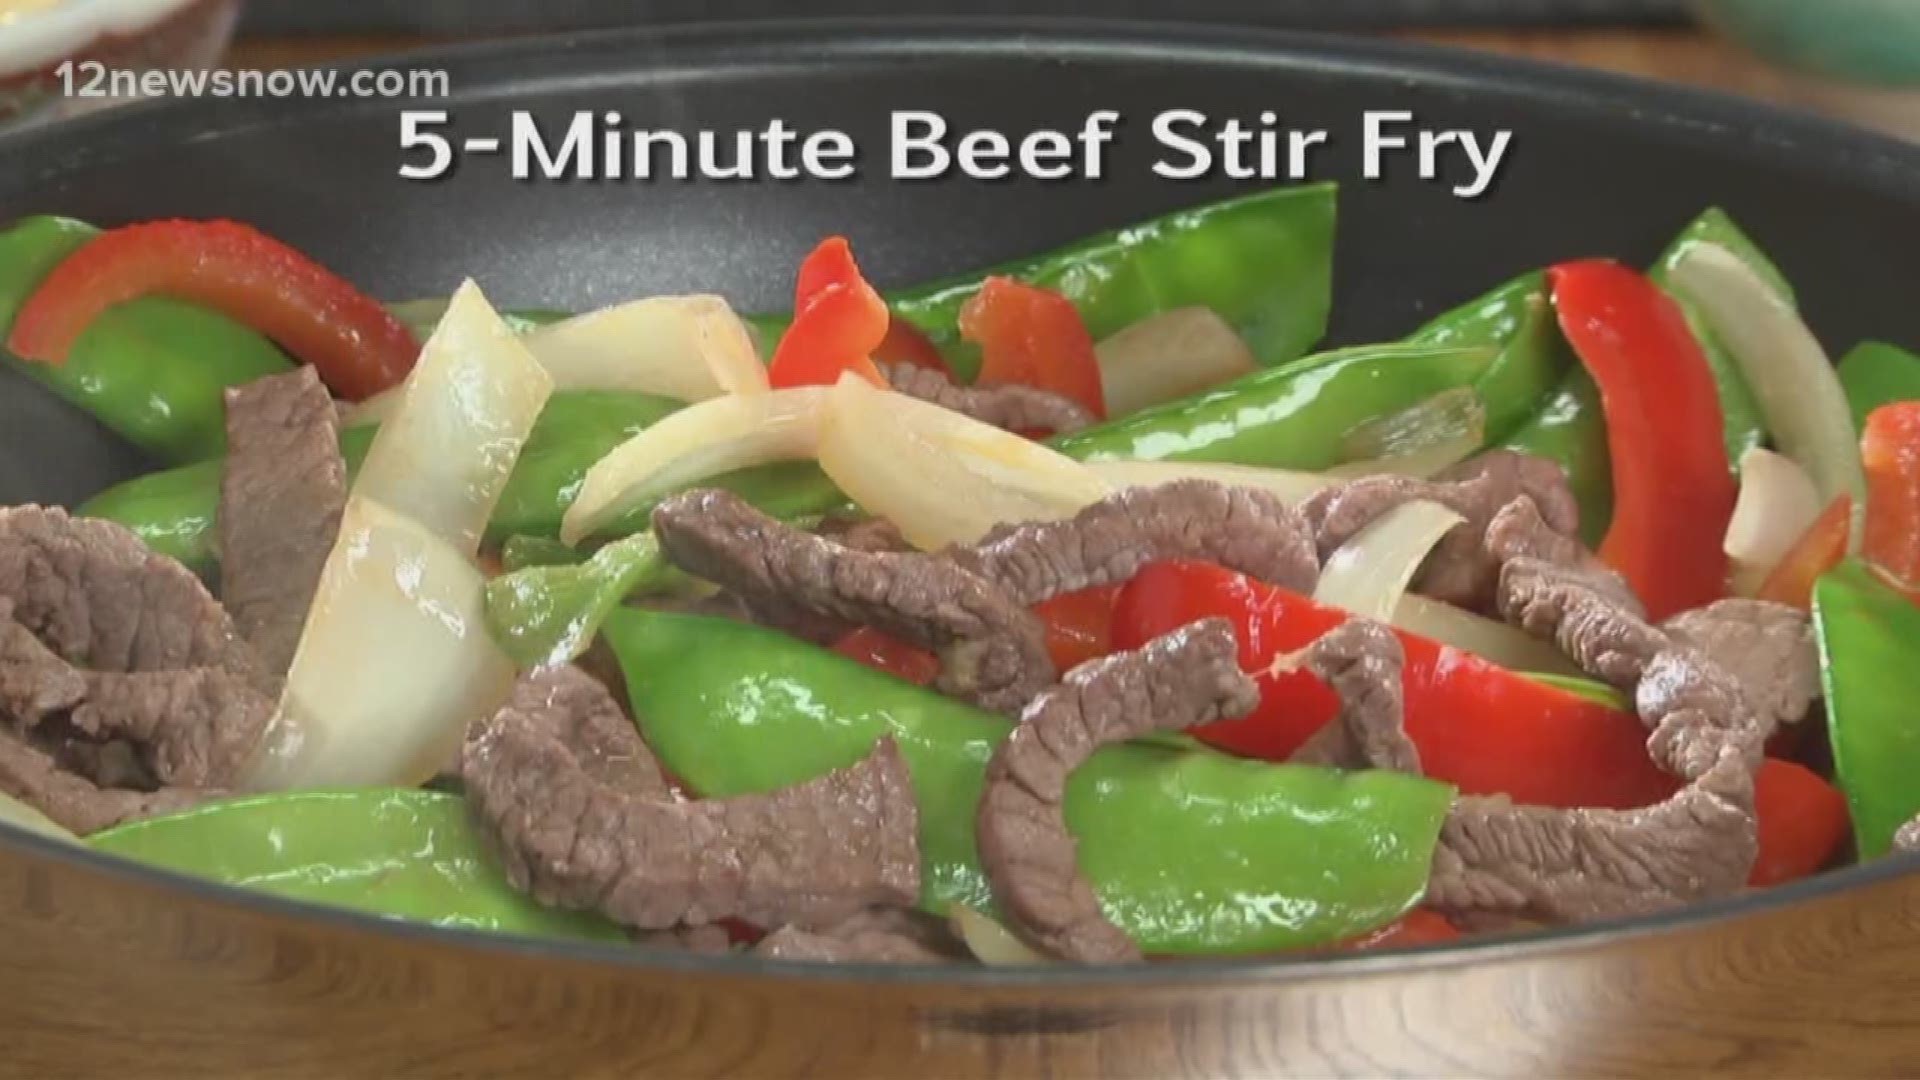 Troy Kless catches Jeff Gerber off-guard with a new way to enjoy stir fry on the weekend